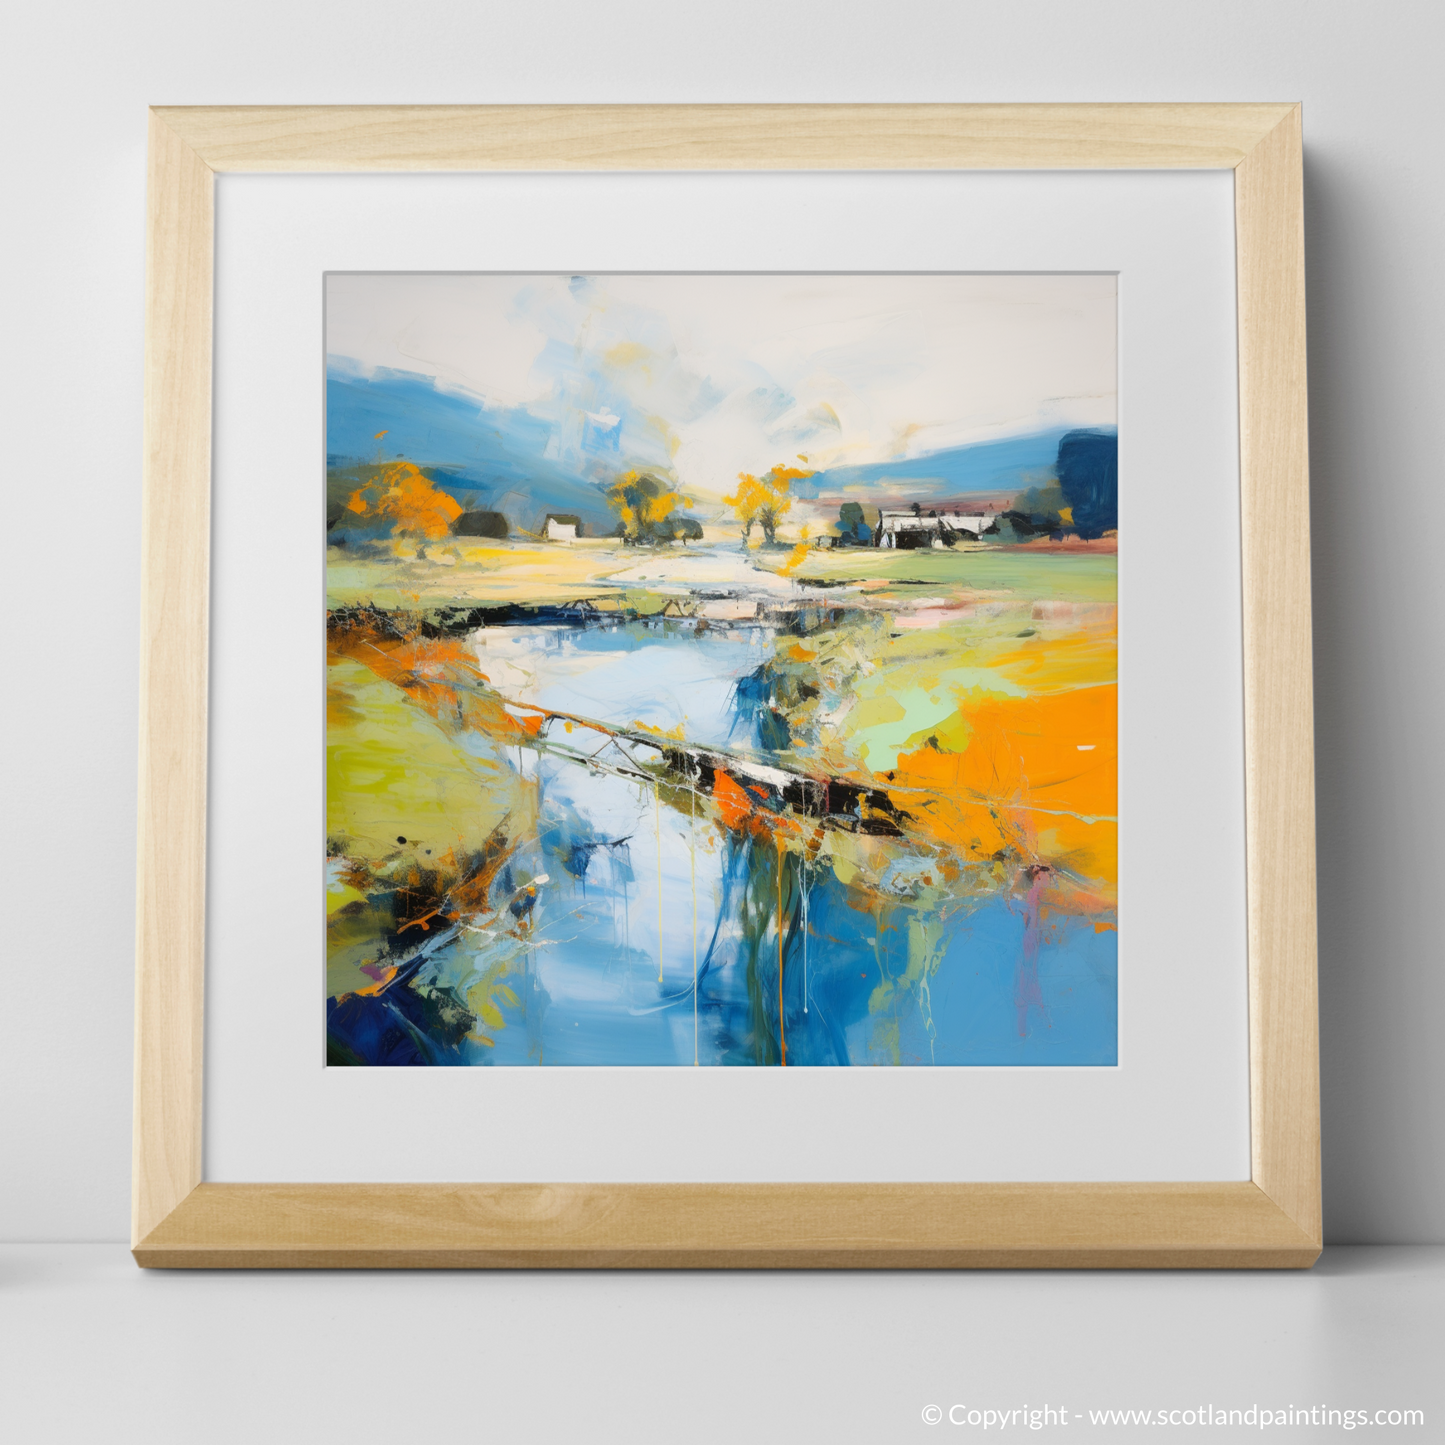 Art Print of River Almond, Edinburgh in summer with a natural frame